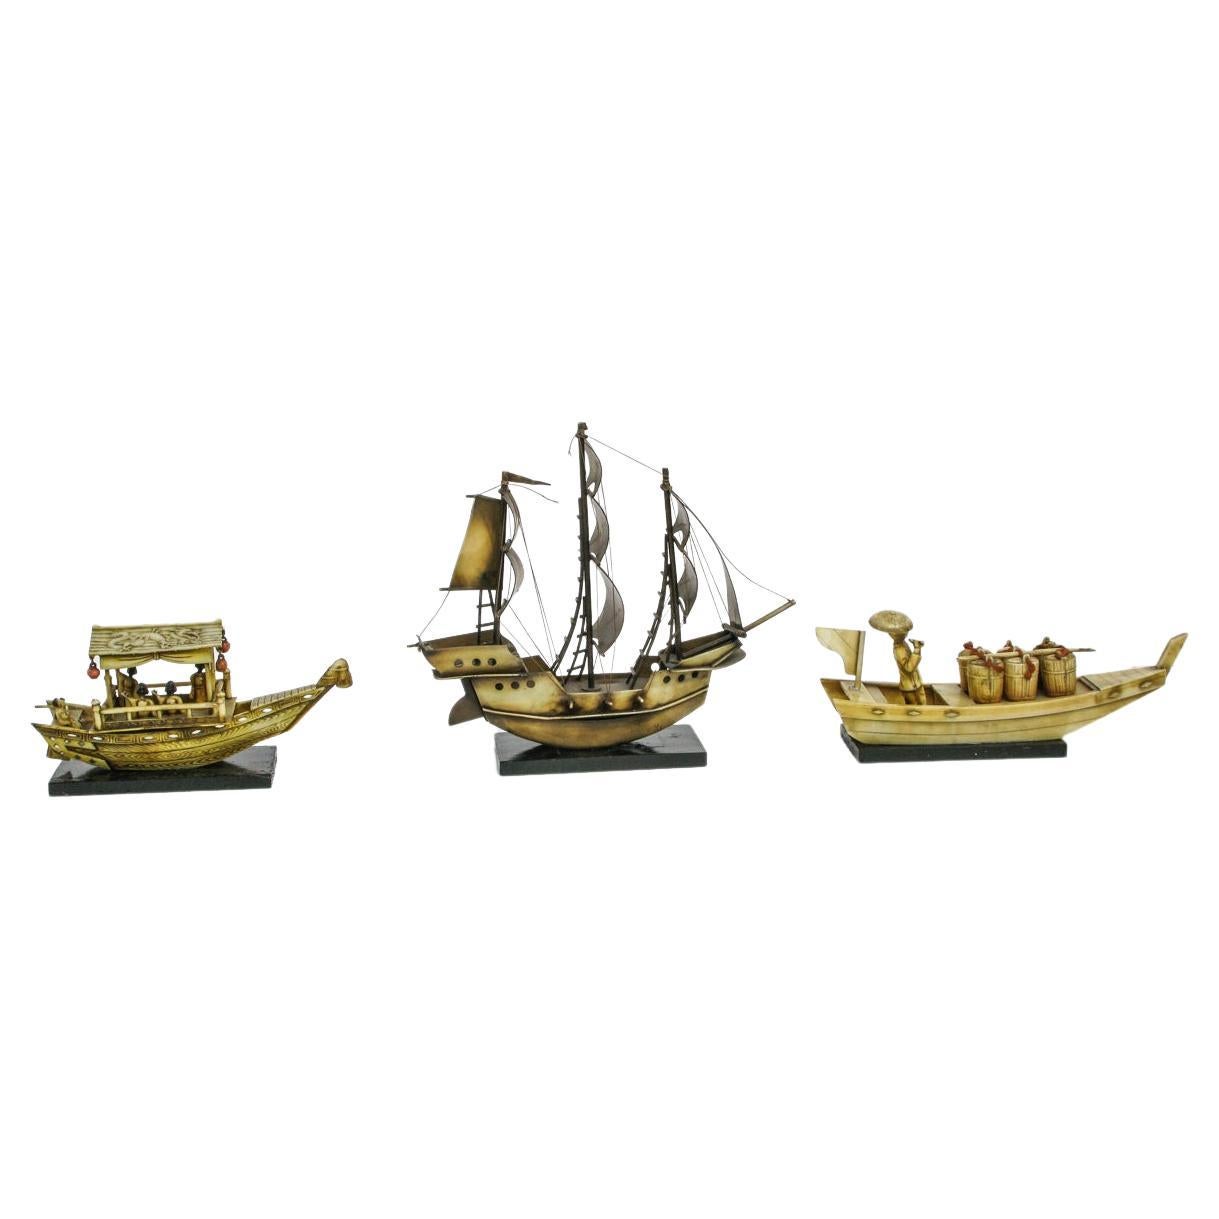 That's really an interesting item. All the little black bases are : cm. 9,5 x 5. The models are, from left to right:
1) musicians: cm. 14x h.7,5 x lenght 5 -
2) in the middle: sailing ship: cm. 18xh. 16 x lenght 6 -
3) fisherman with barrels: cm.